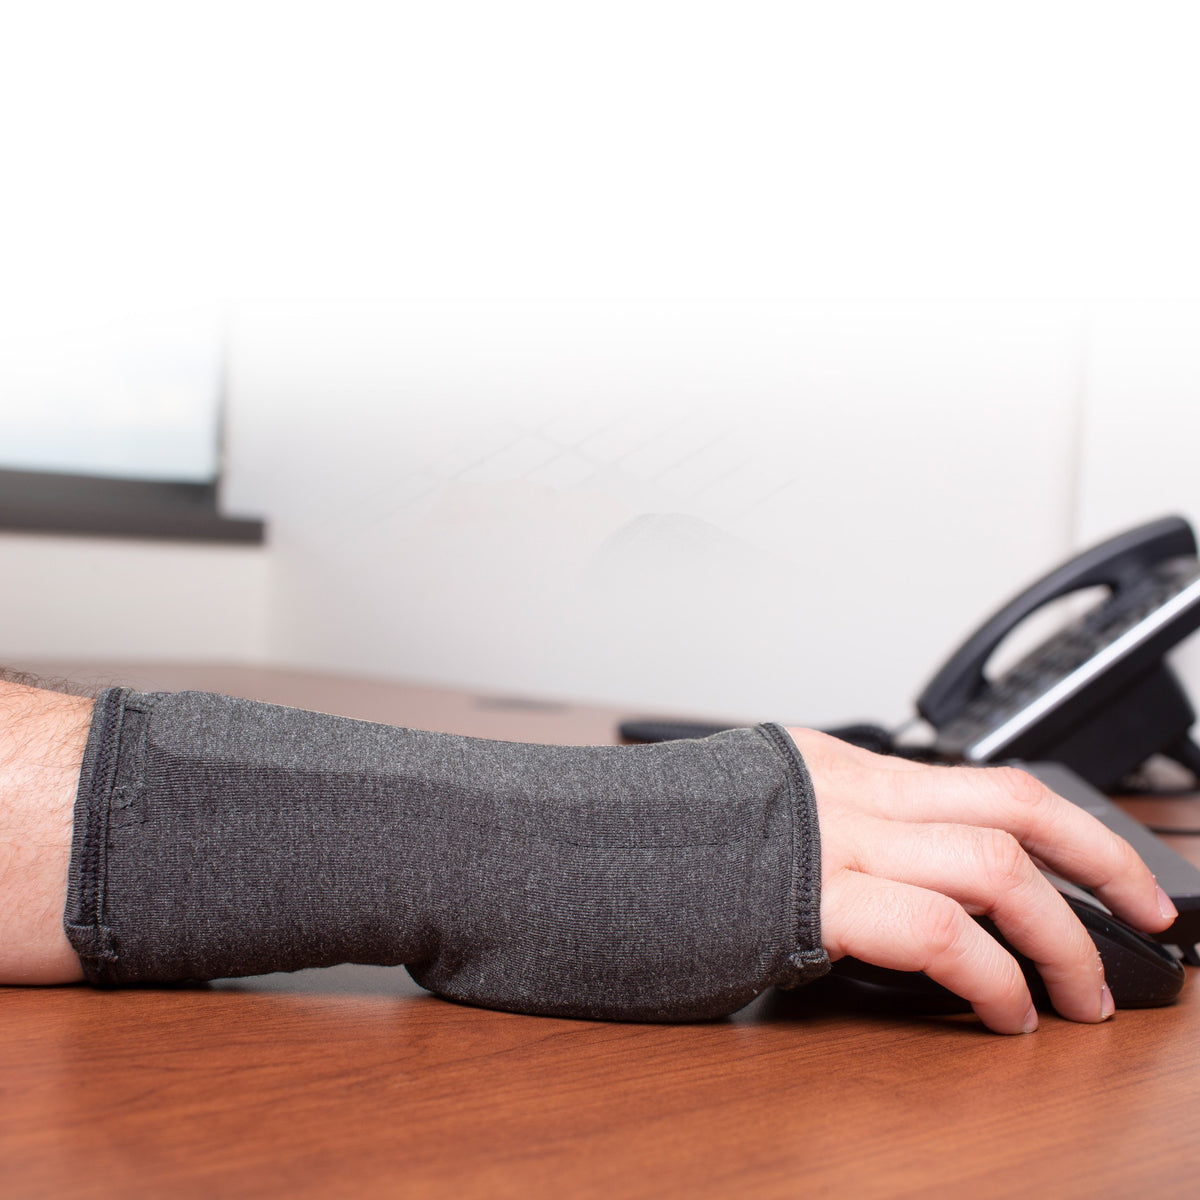 Copper Joe Carpal Tunnel Wrist Brace for Day and Night Support